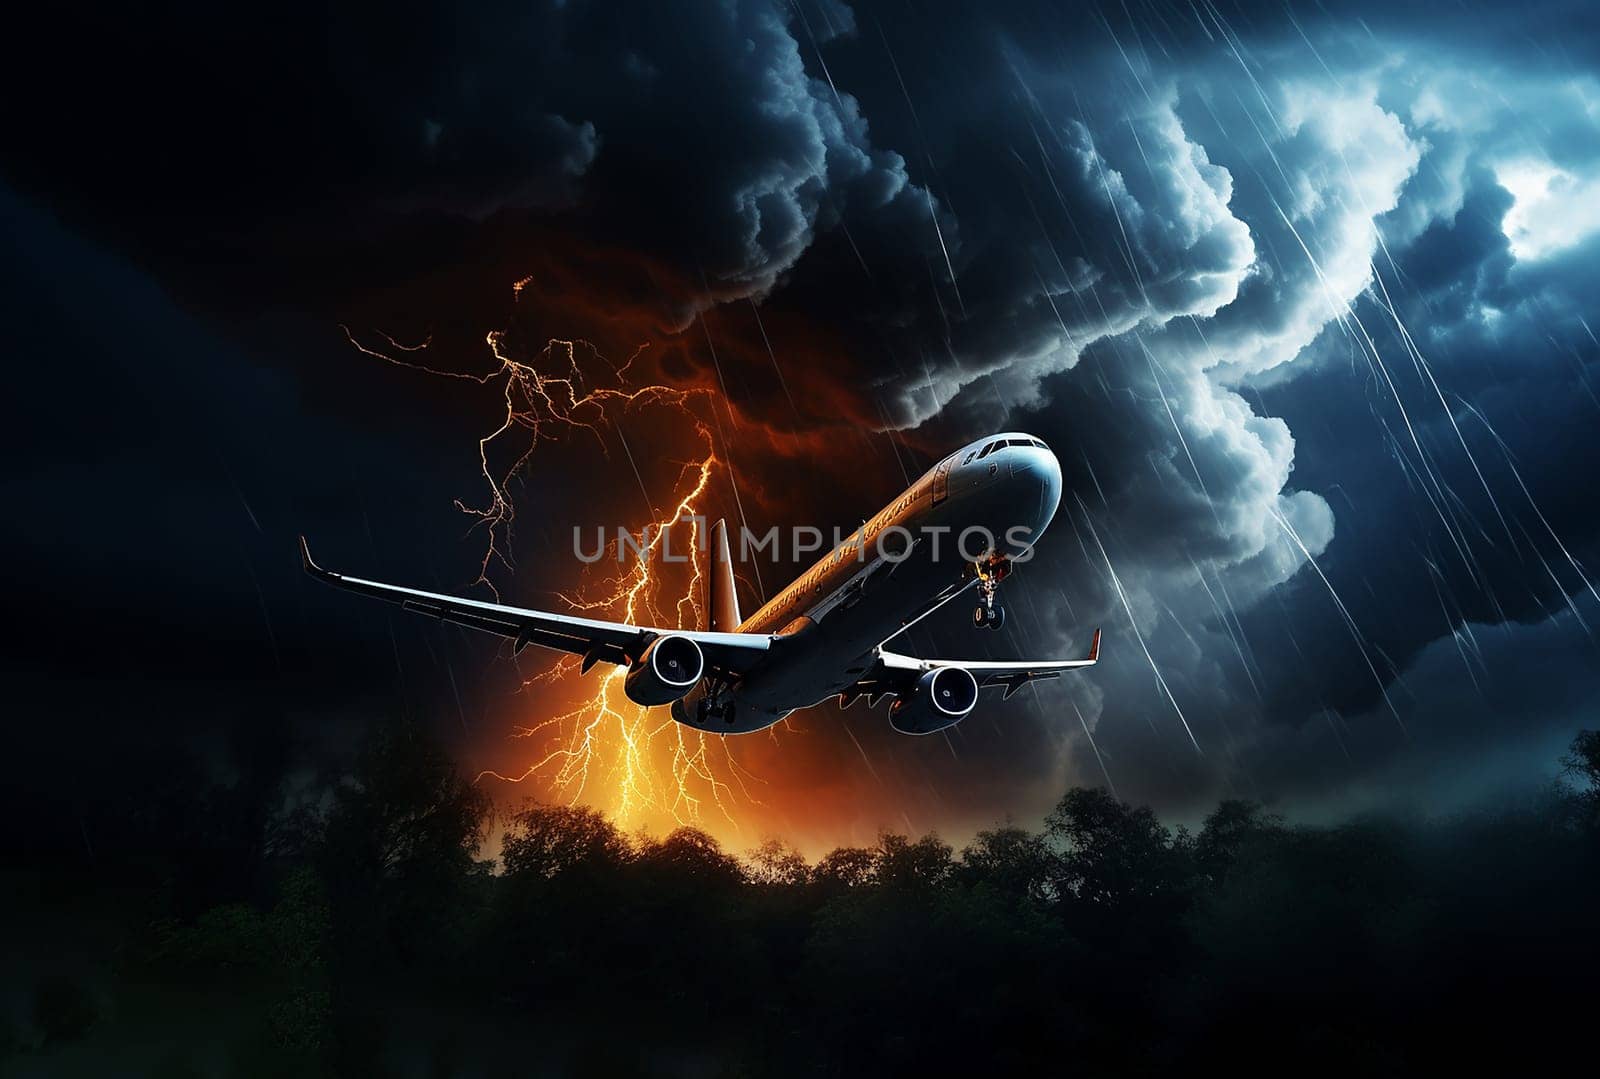 a storm warning. the plane is landing. Thunderstorm, storm and lightning in the night sky. plane crash in thunderstorm warning. Bad weather. High quality photo